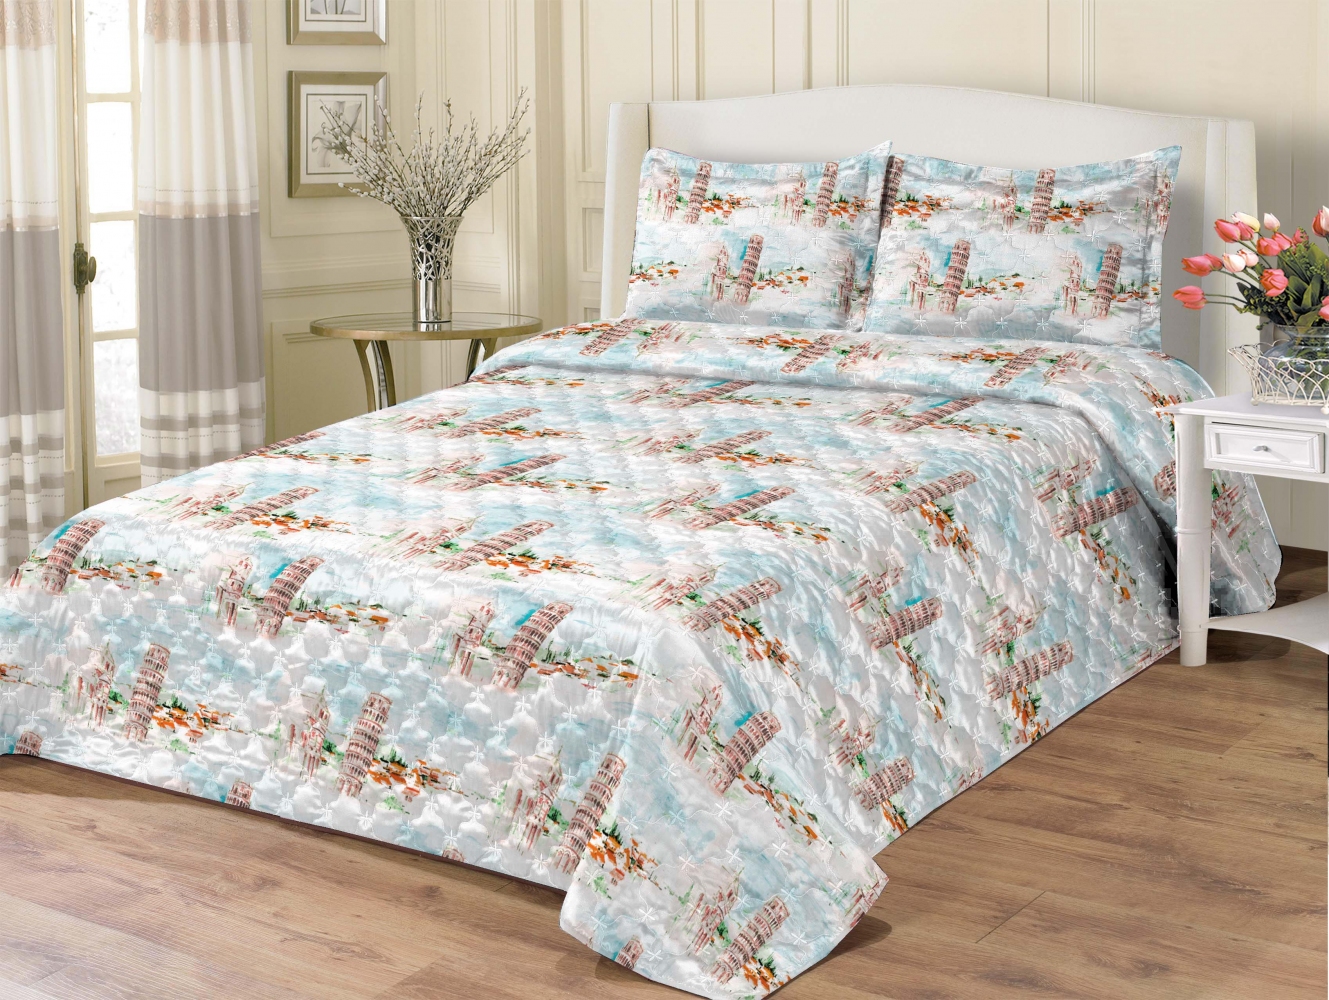 Cotton quilted bedspread